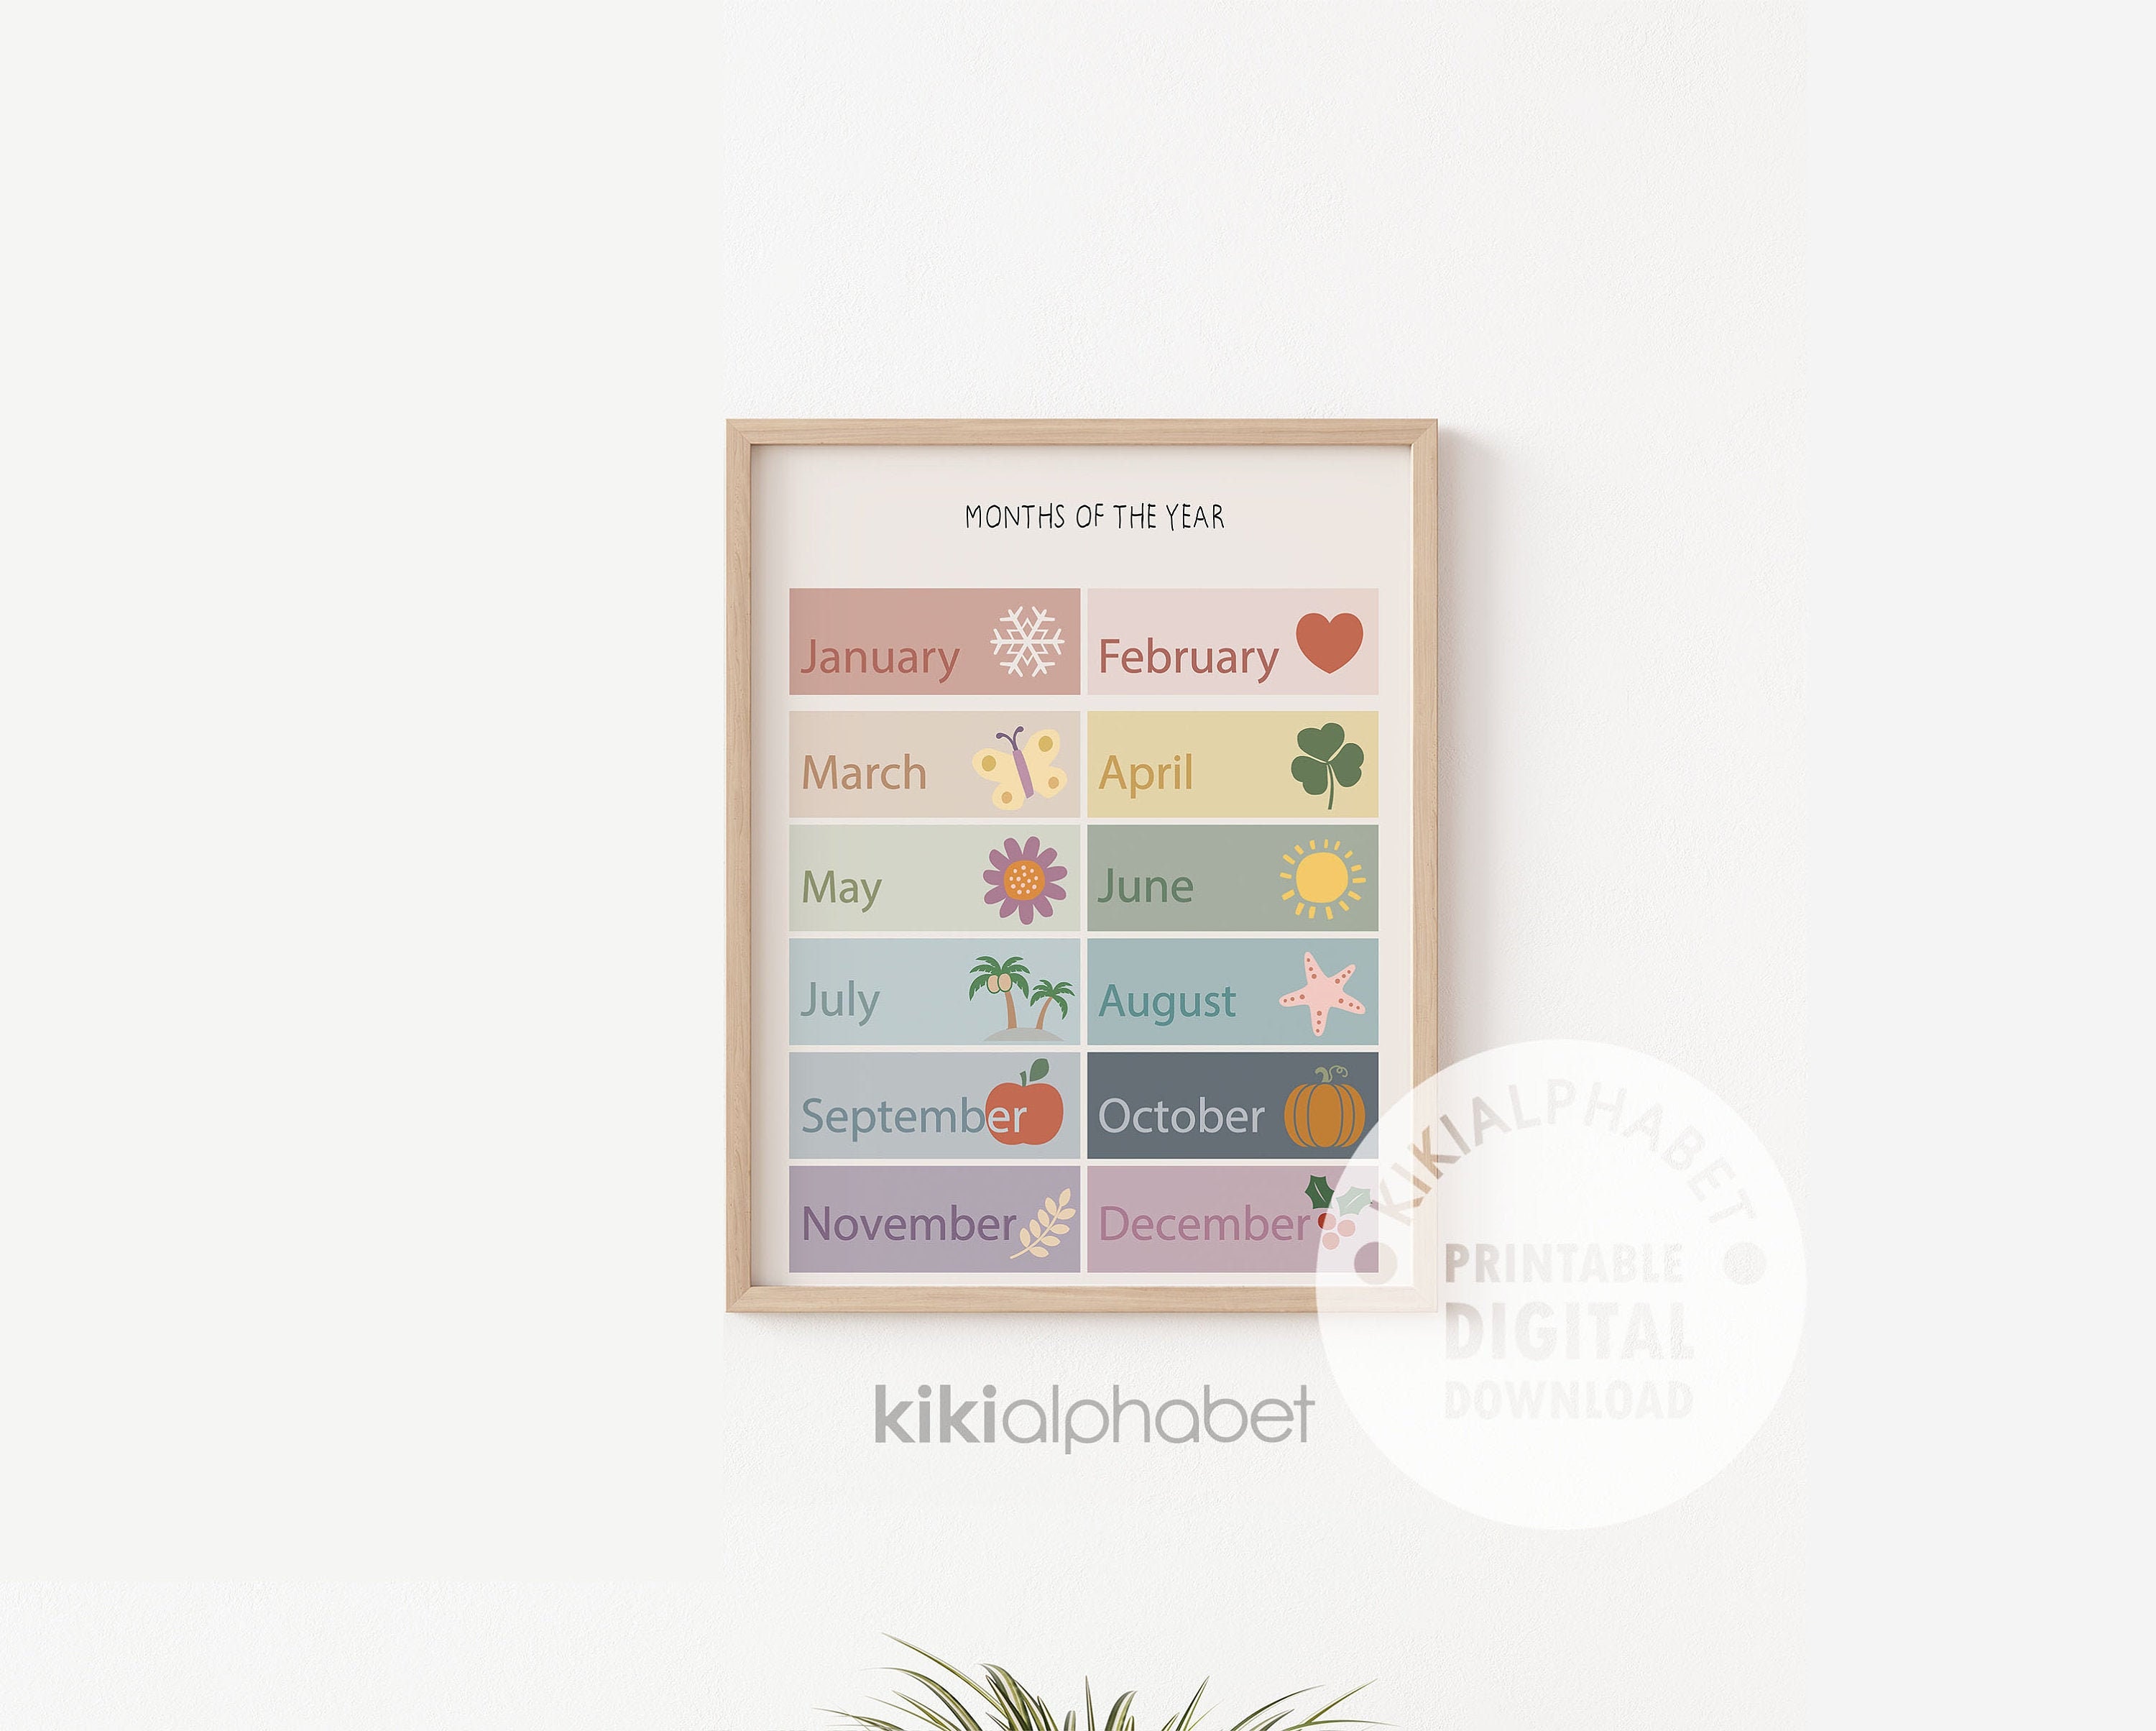 Months of the Year Poster Montessori Poster Classroom Decor Months Poster Days of the Week Digital Download Poster Nursery Decor